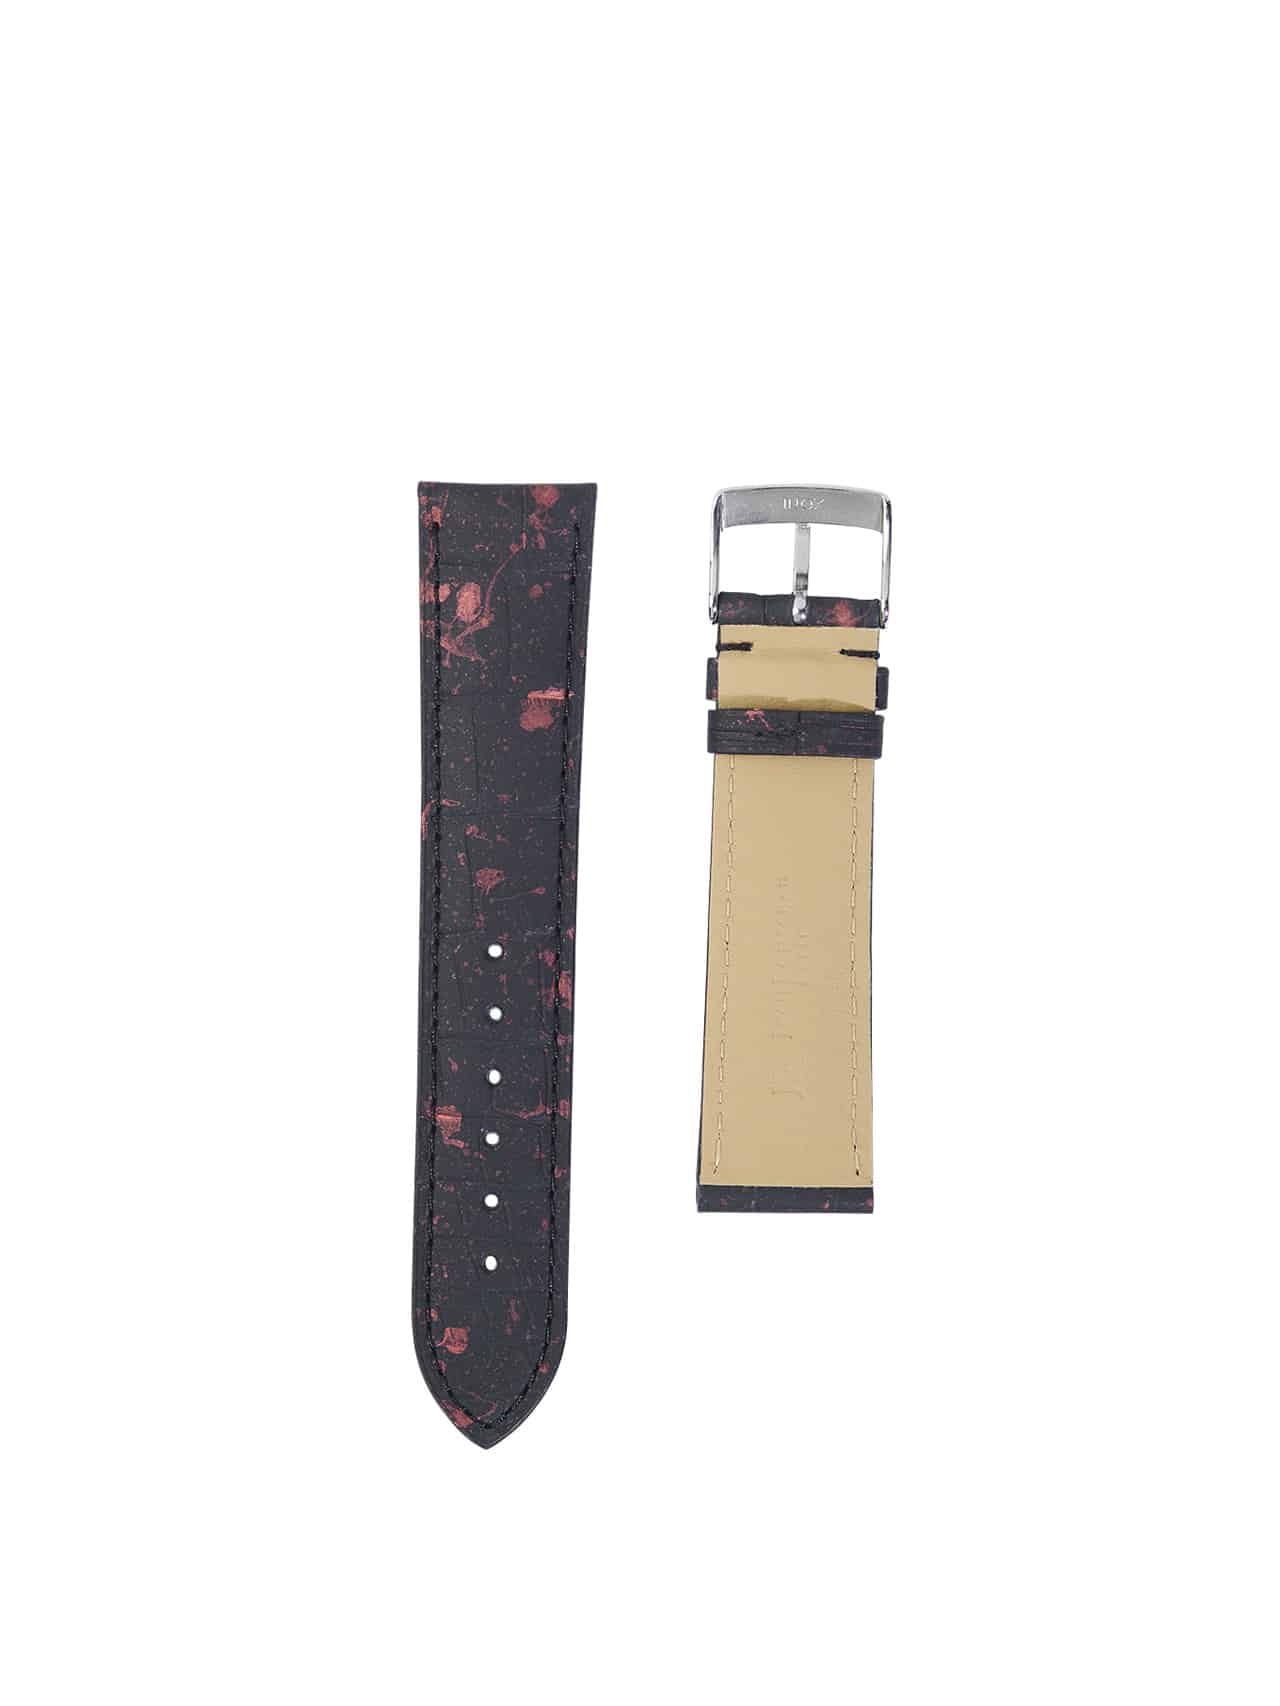 Watch strap 3.5 Asteria rubber touch crocodile pink back